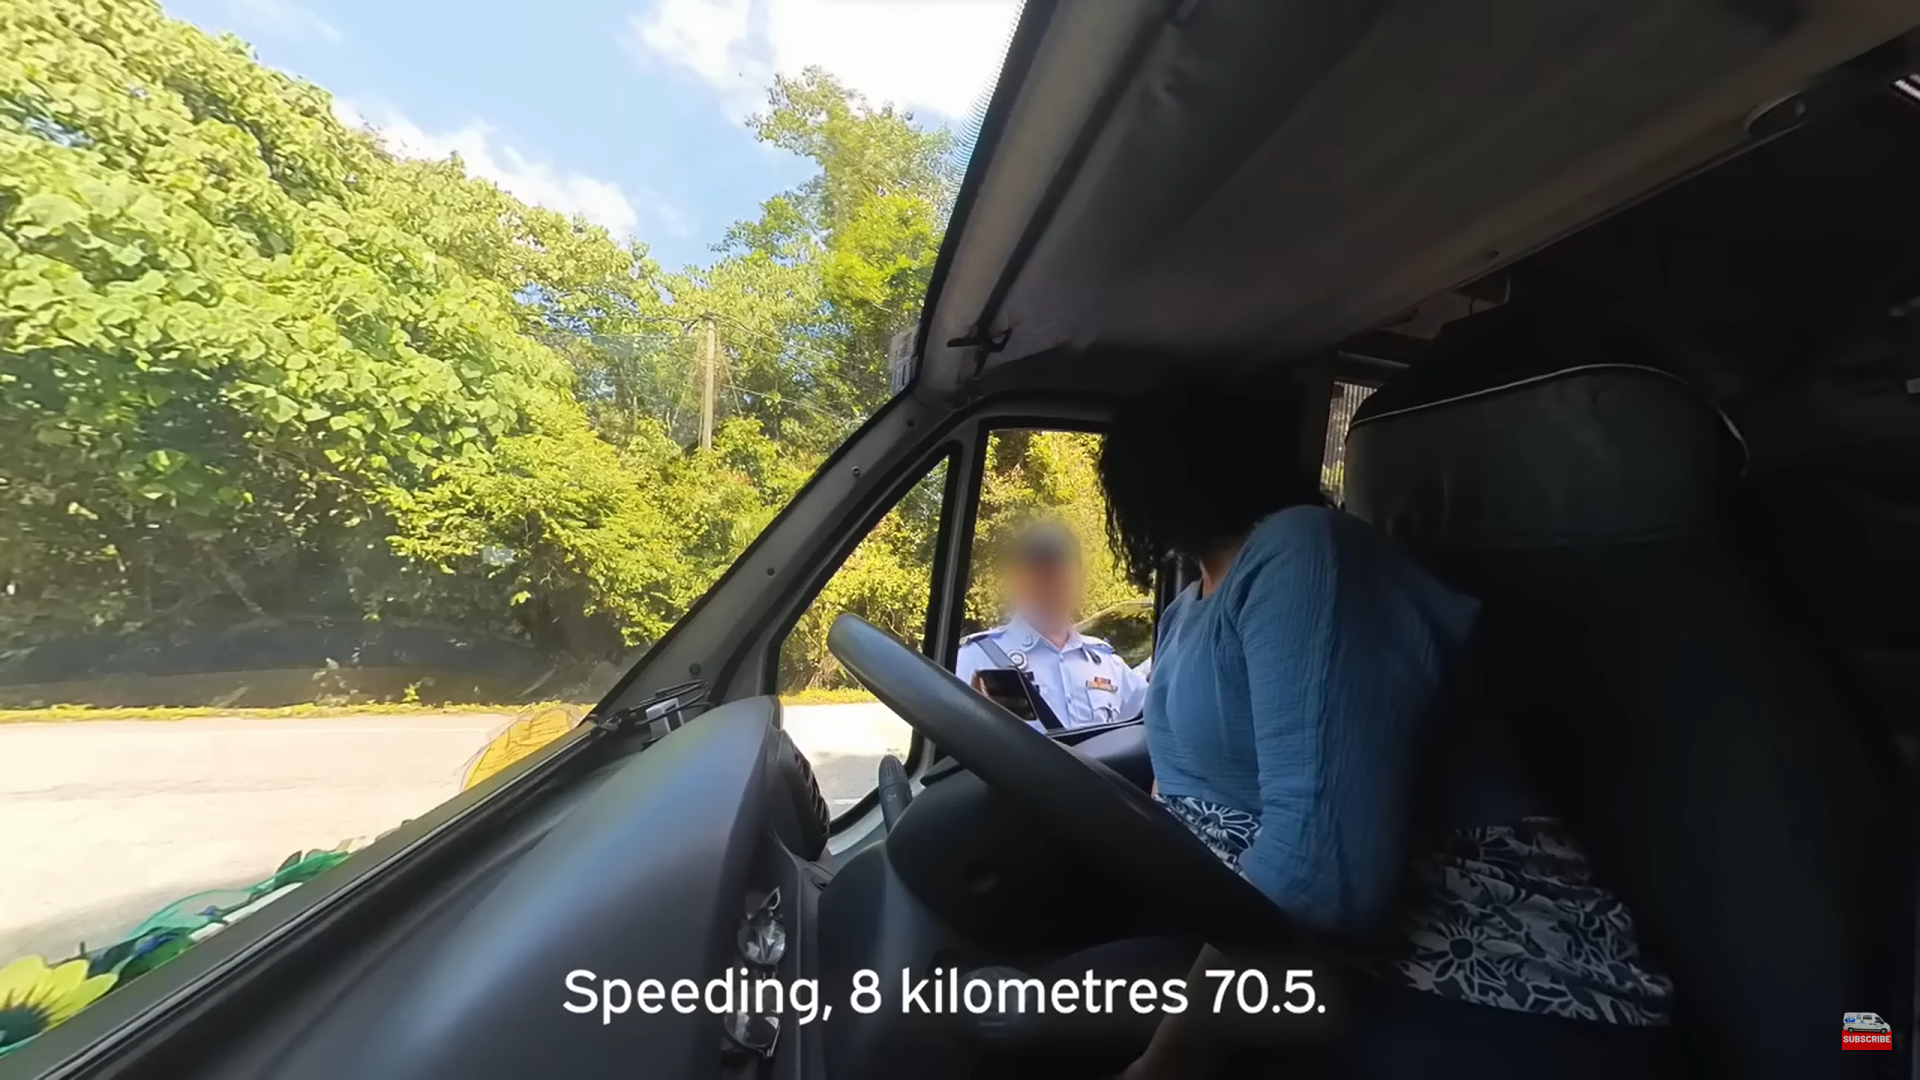 Uk couple pulled over for speeding